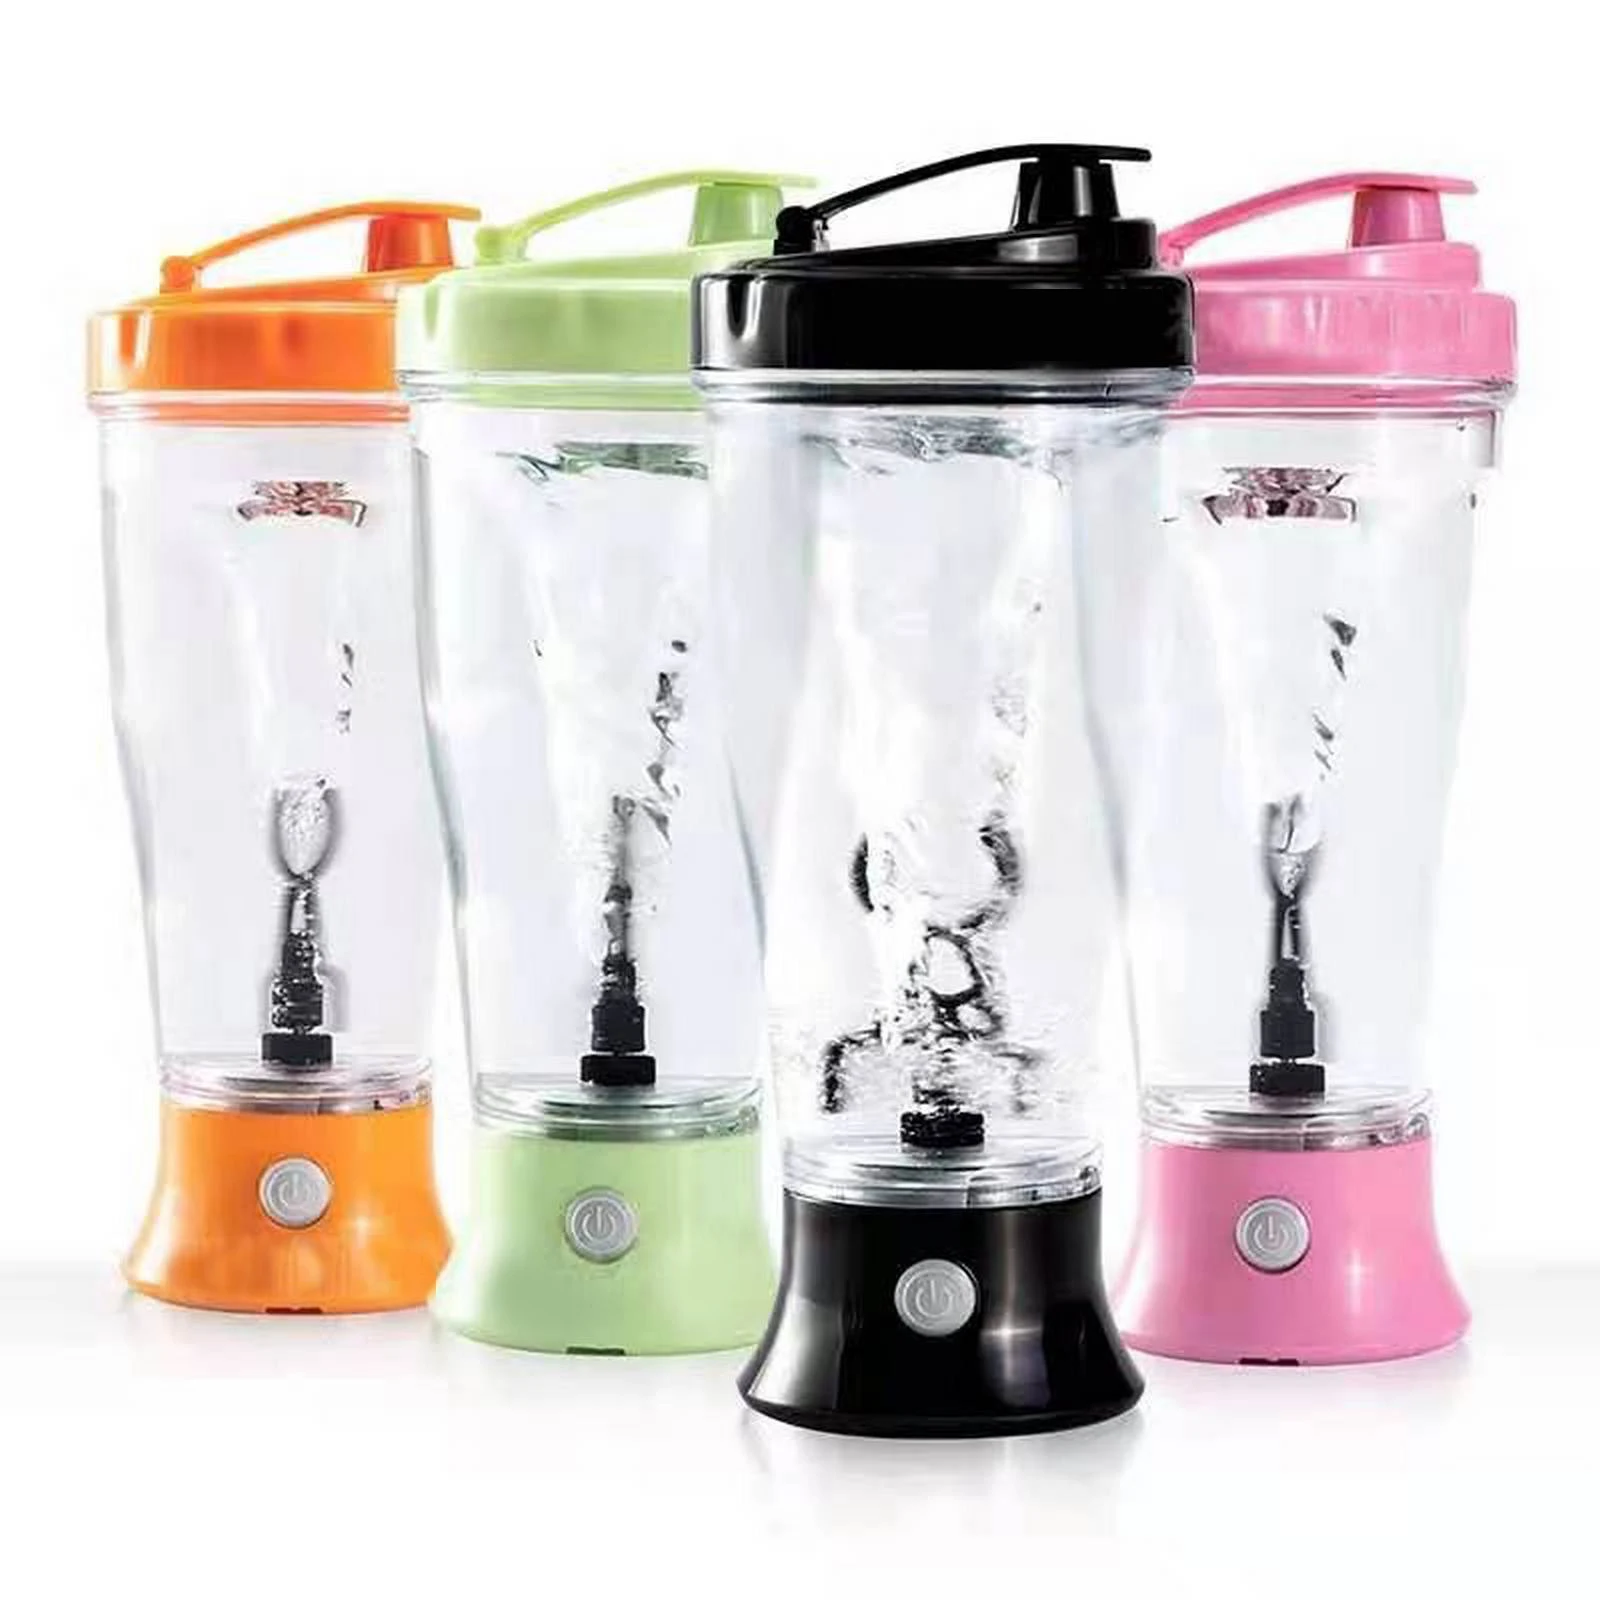 https://ae01.alicdn.com/kf/S147844caba6b4806a92b6587a70ec4e8B/300-600ML-Travel-Electric-Protein-Powder-Mixing-Cup-Battery-Automatic-Shaker-Bottle-Mixer-Acrylic-Glass.jpg